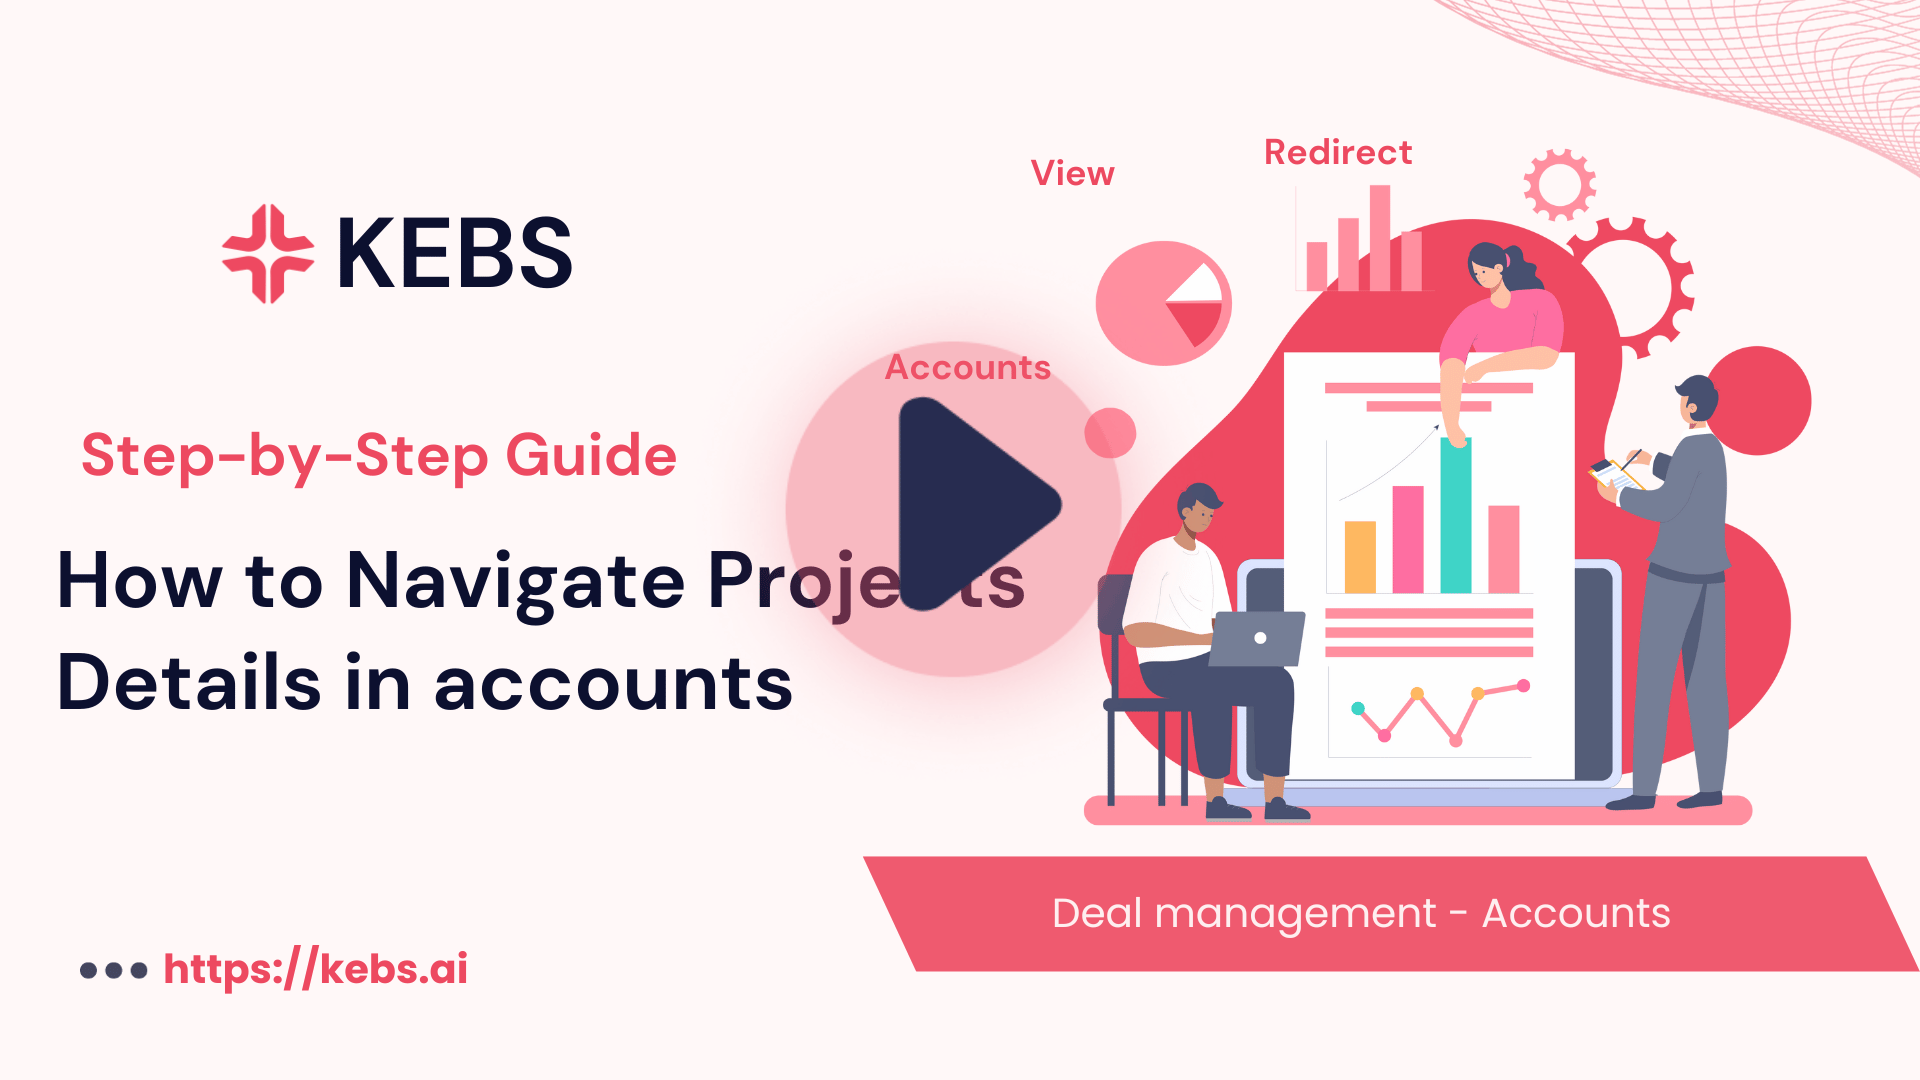 How to Navigate Projects Details in accounts